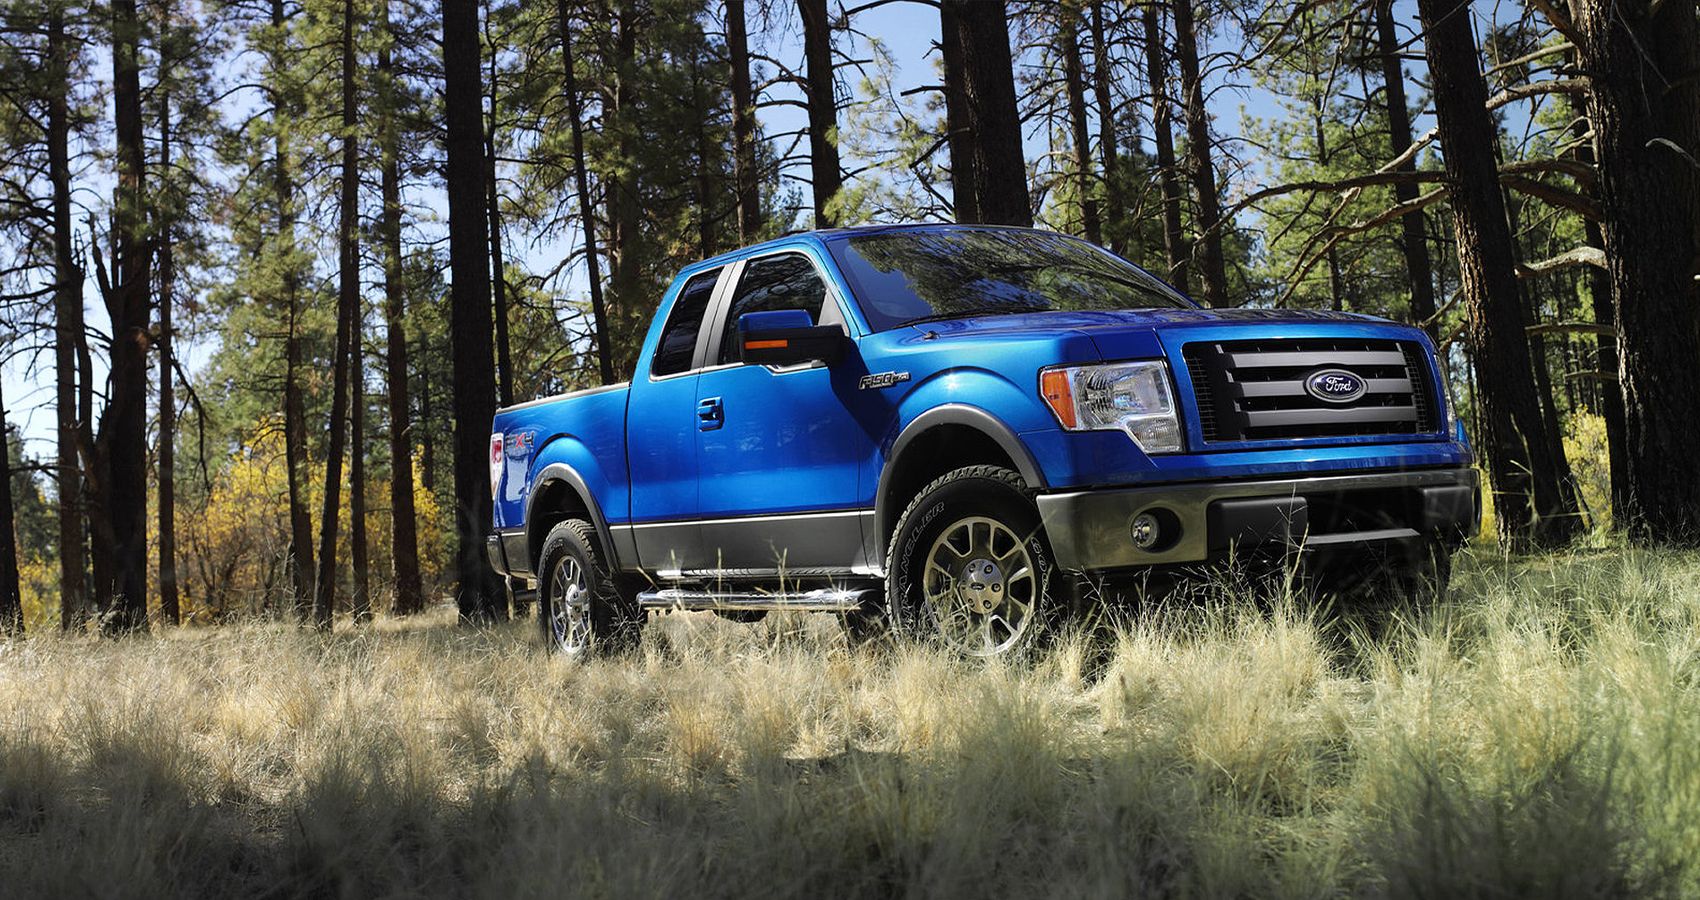 2009 Ford F-150 FX4 in Blue Front View